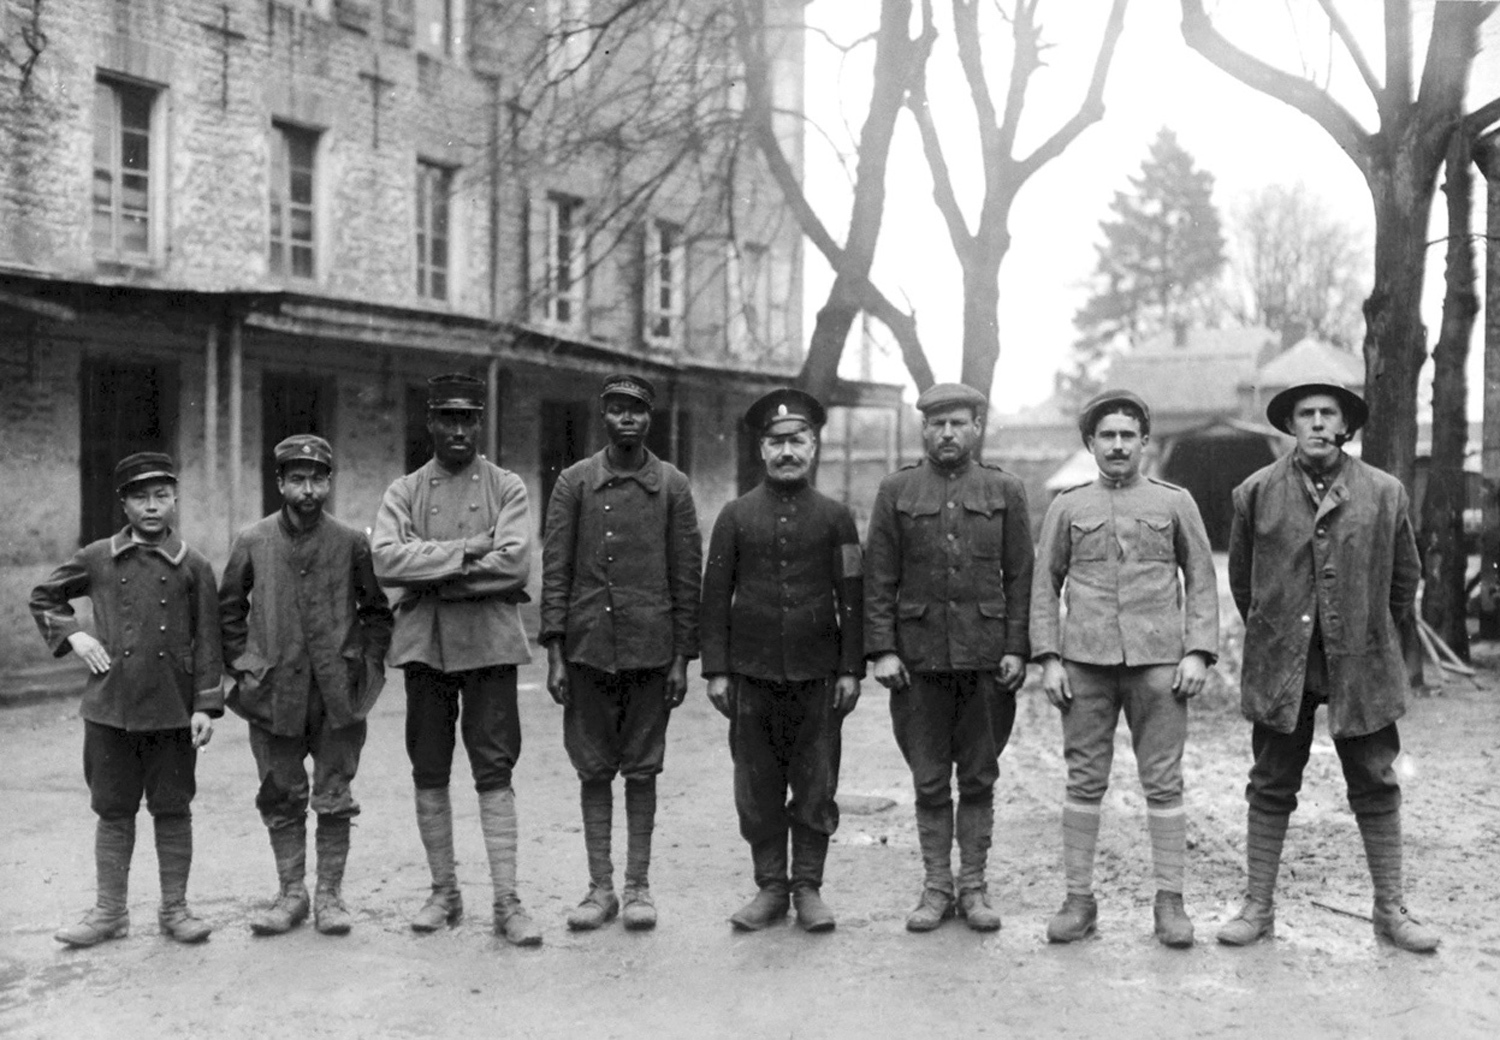 Western front, a group of captured Allied soldiers representing 8 nationalities: Anamite (Vietnamese), Tunisian, Senegalese, Sudanese, Russian, American, Portuguese, and English.